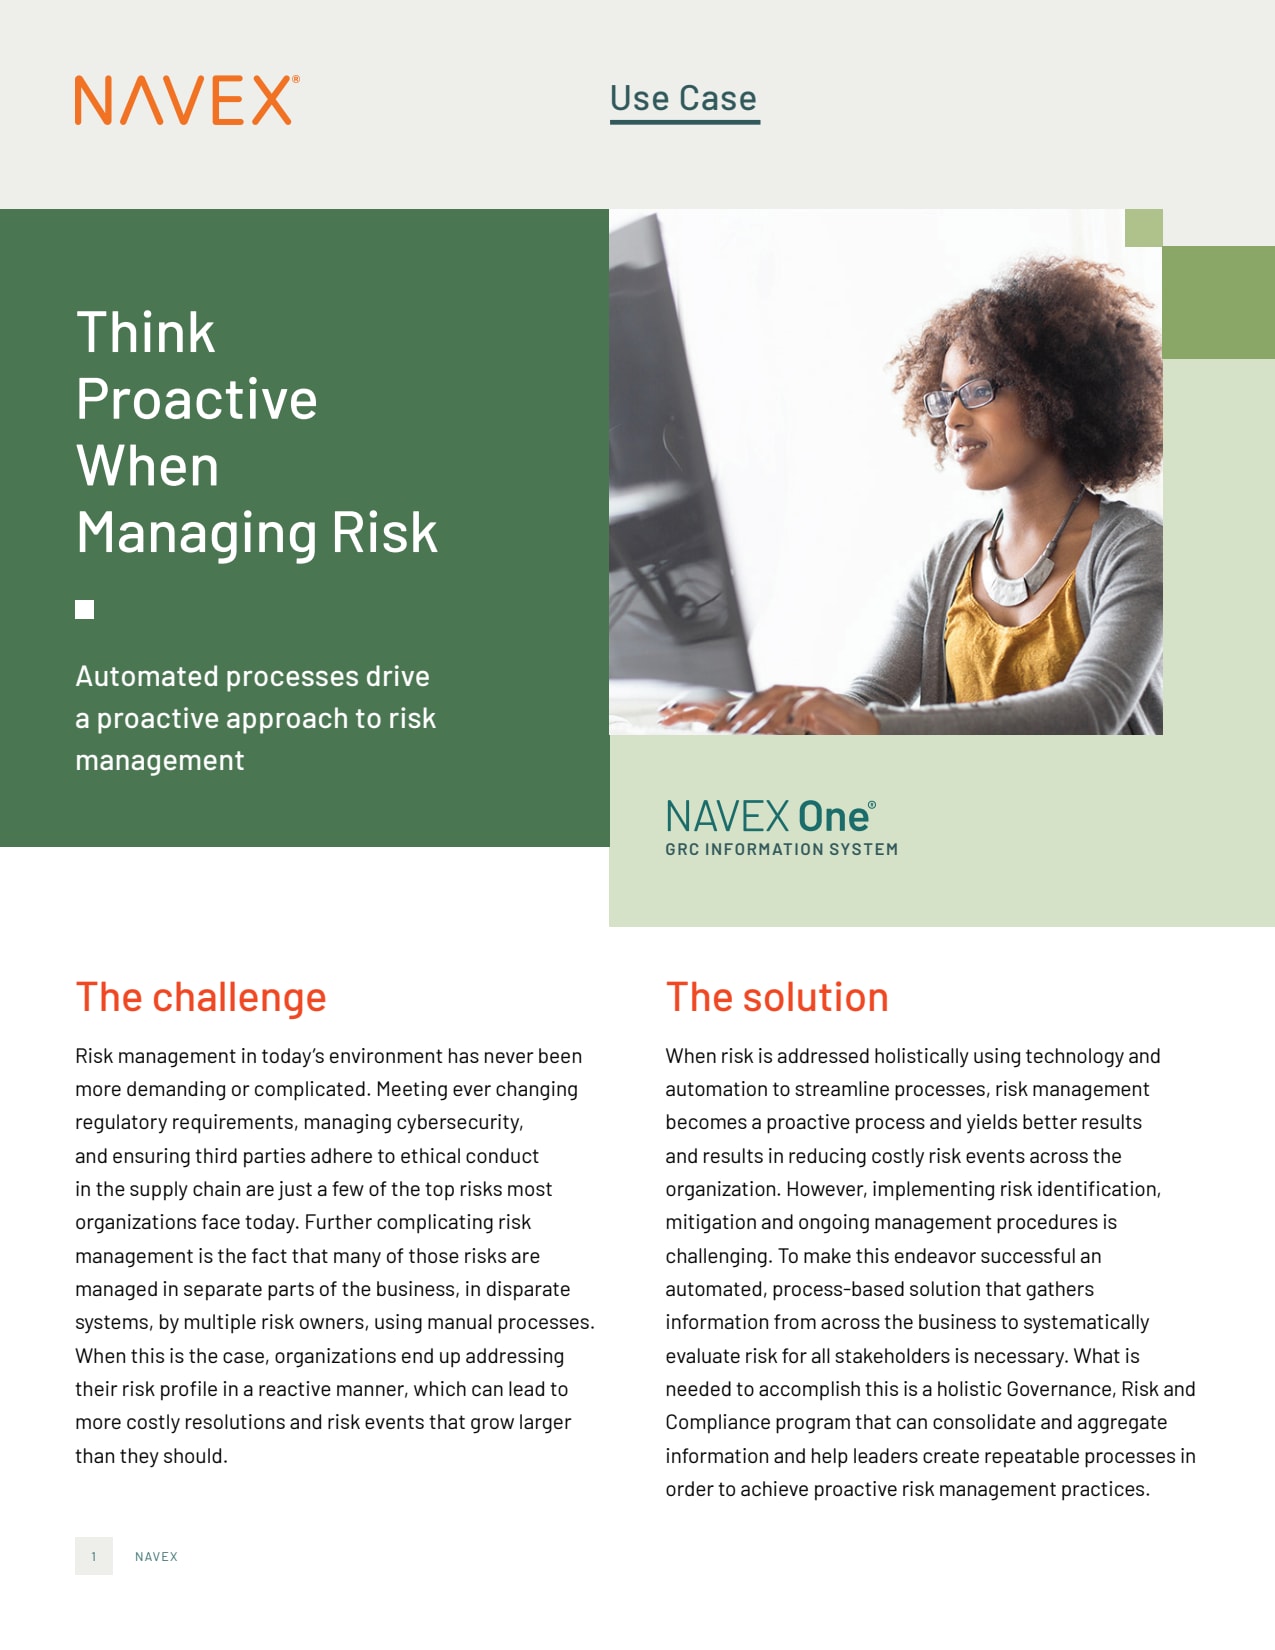 How to Be Proactive When Managing Risk Use Case